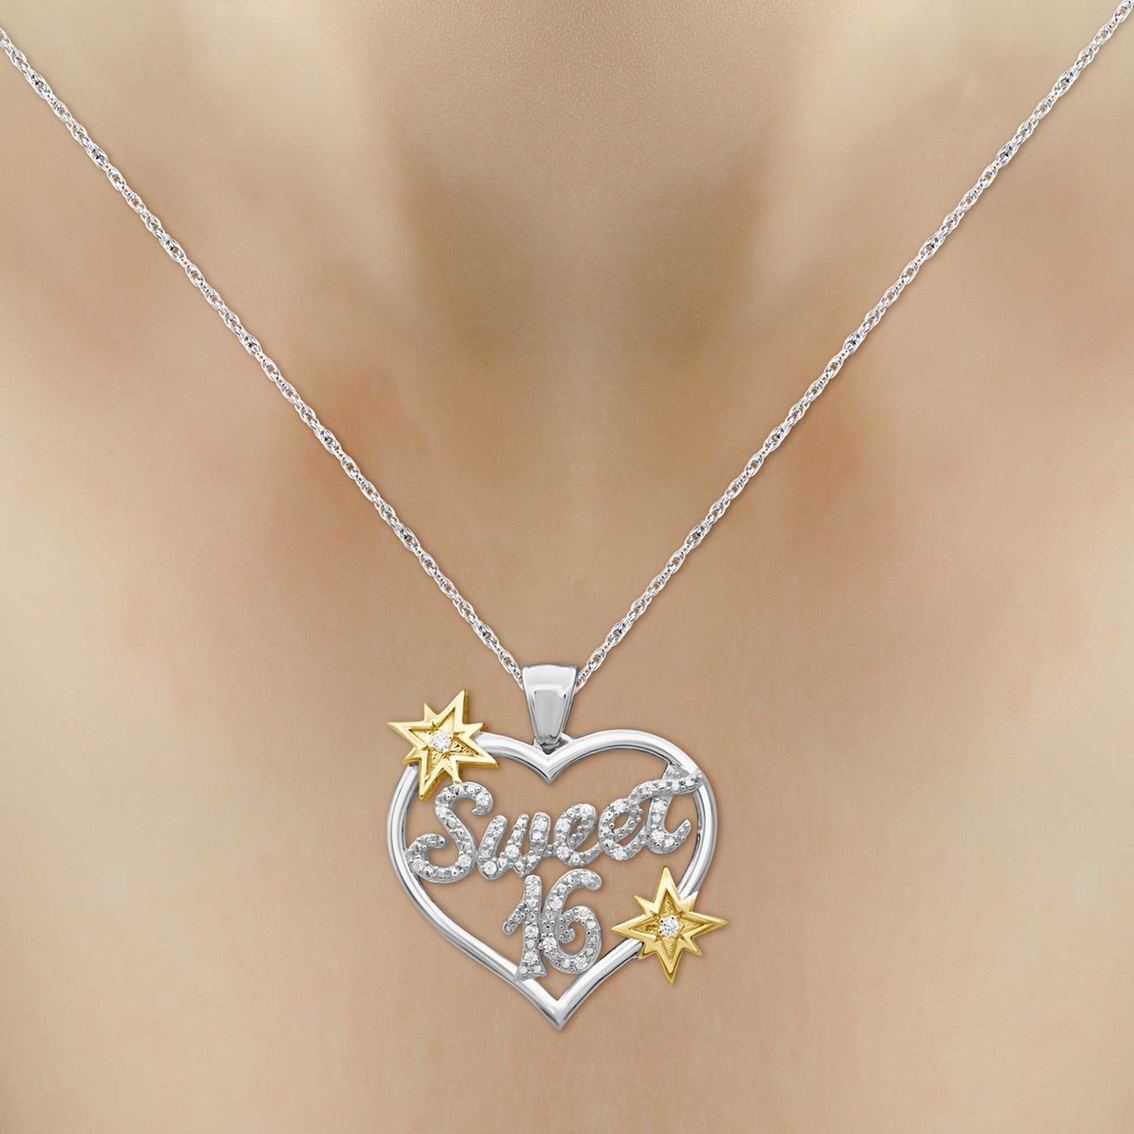 She Shines Sterling Silver and 14K Goldtone 1/7 CTW Diamond Sweet 16 Heart Pendant - Image 3 of 4